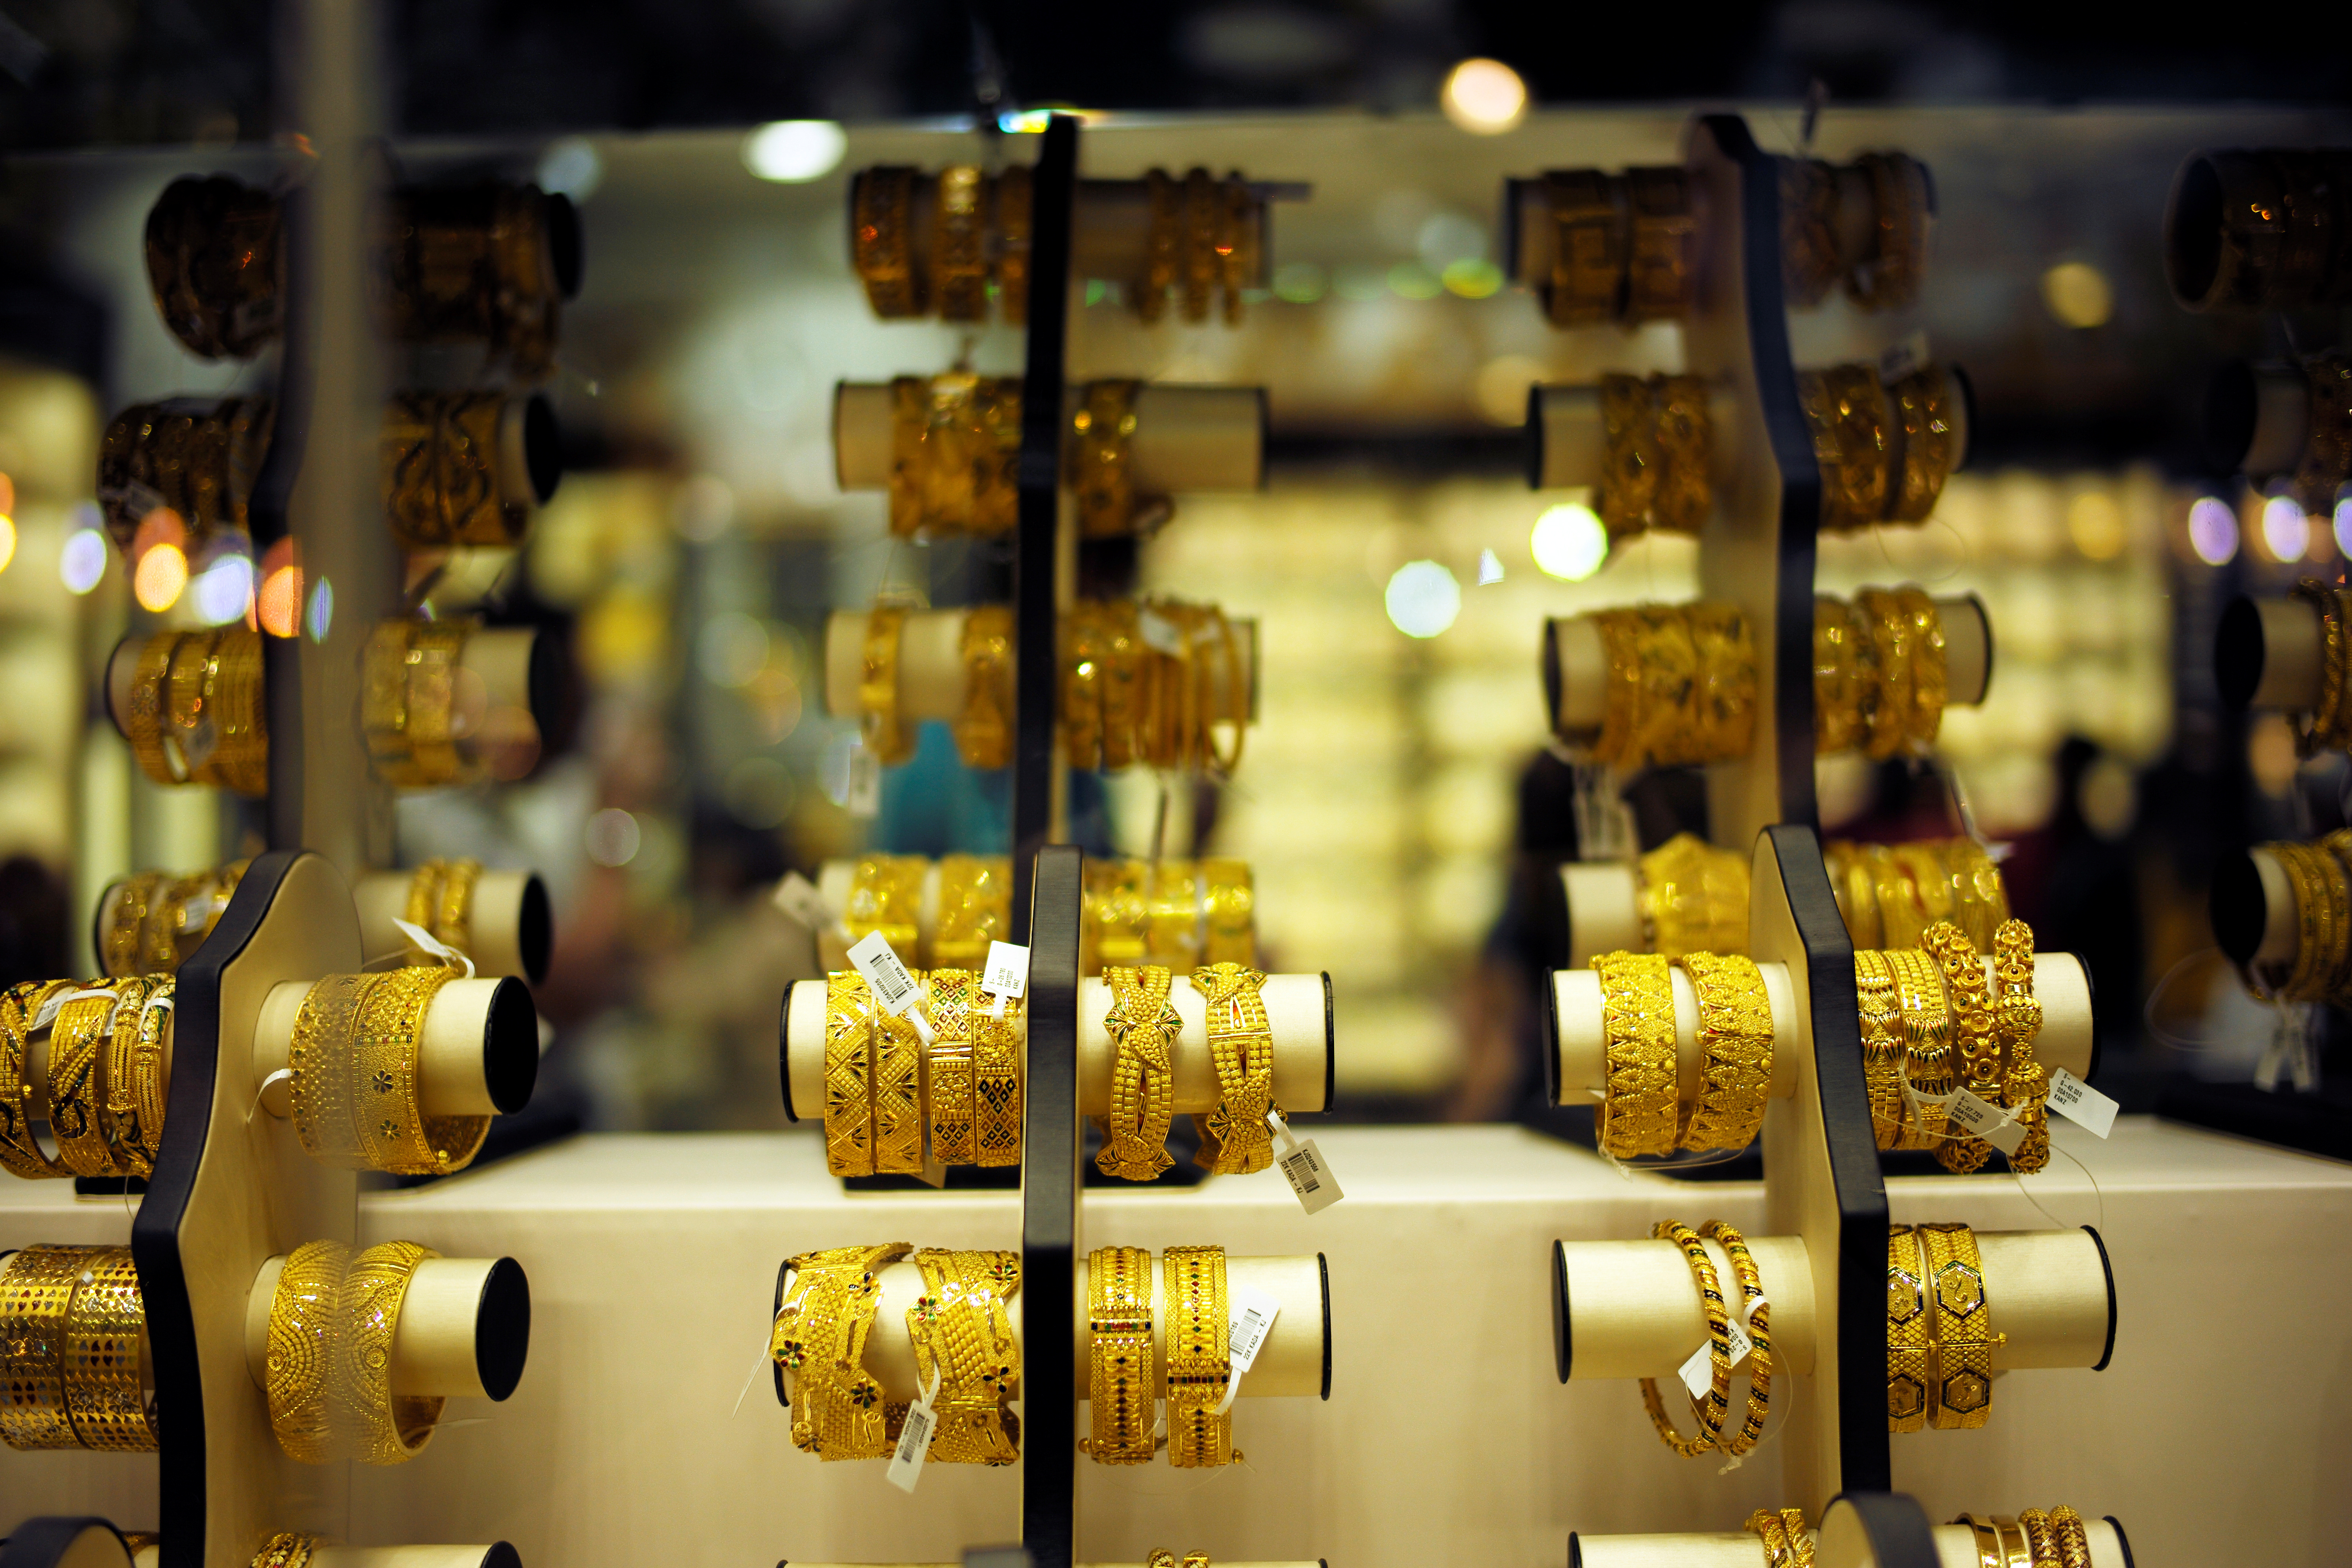 Gold bangles are displayed at a gold shop in Gold Souq in Dubai